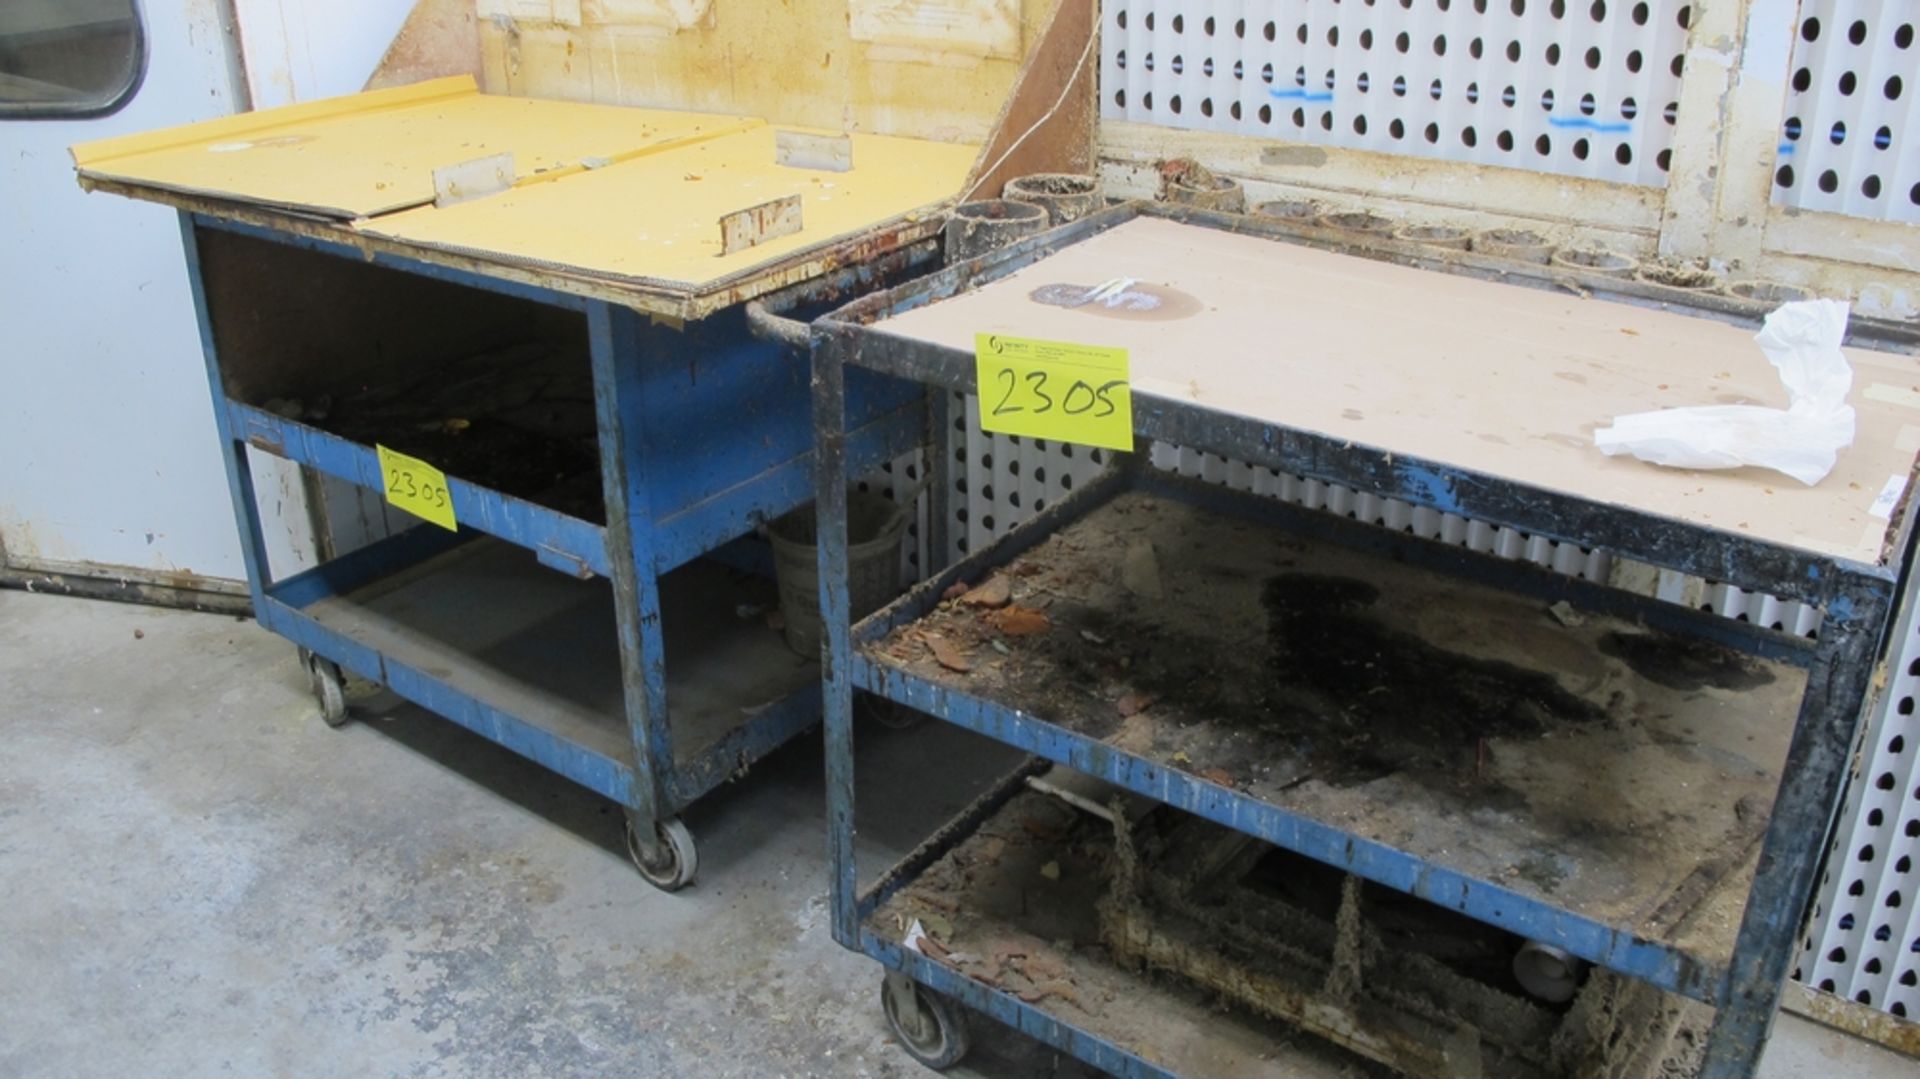 LOT OF 16' FABRIC LAYOUT TABLE, 2 CARTS AND METRO CART IN PAINT BOOTH (100 SHIRLEY AVE KITCHENER) - Image 3 of 3